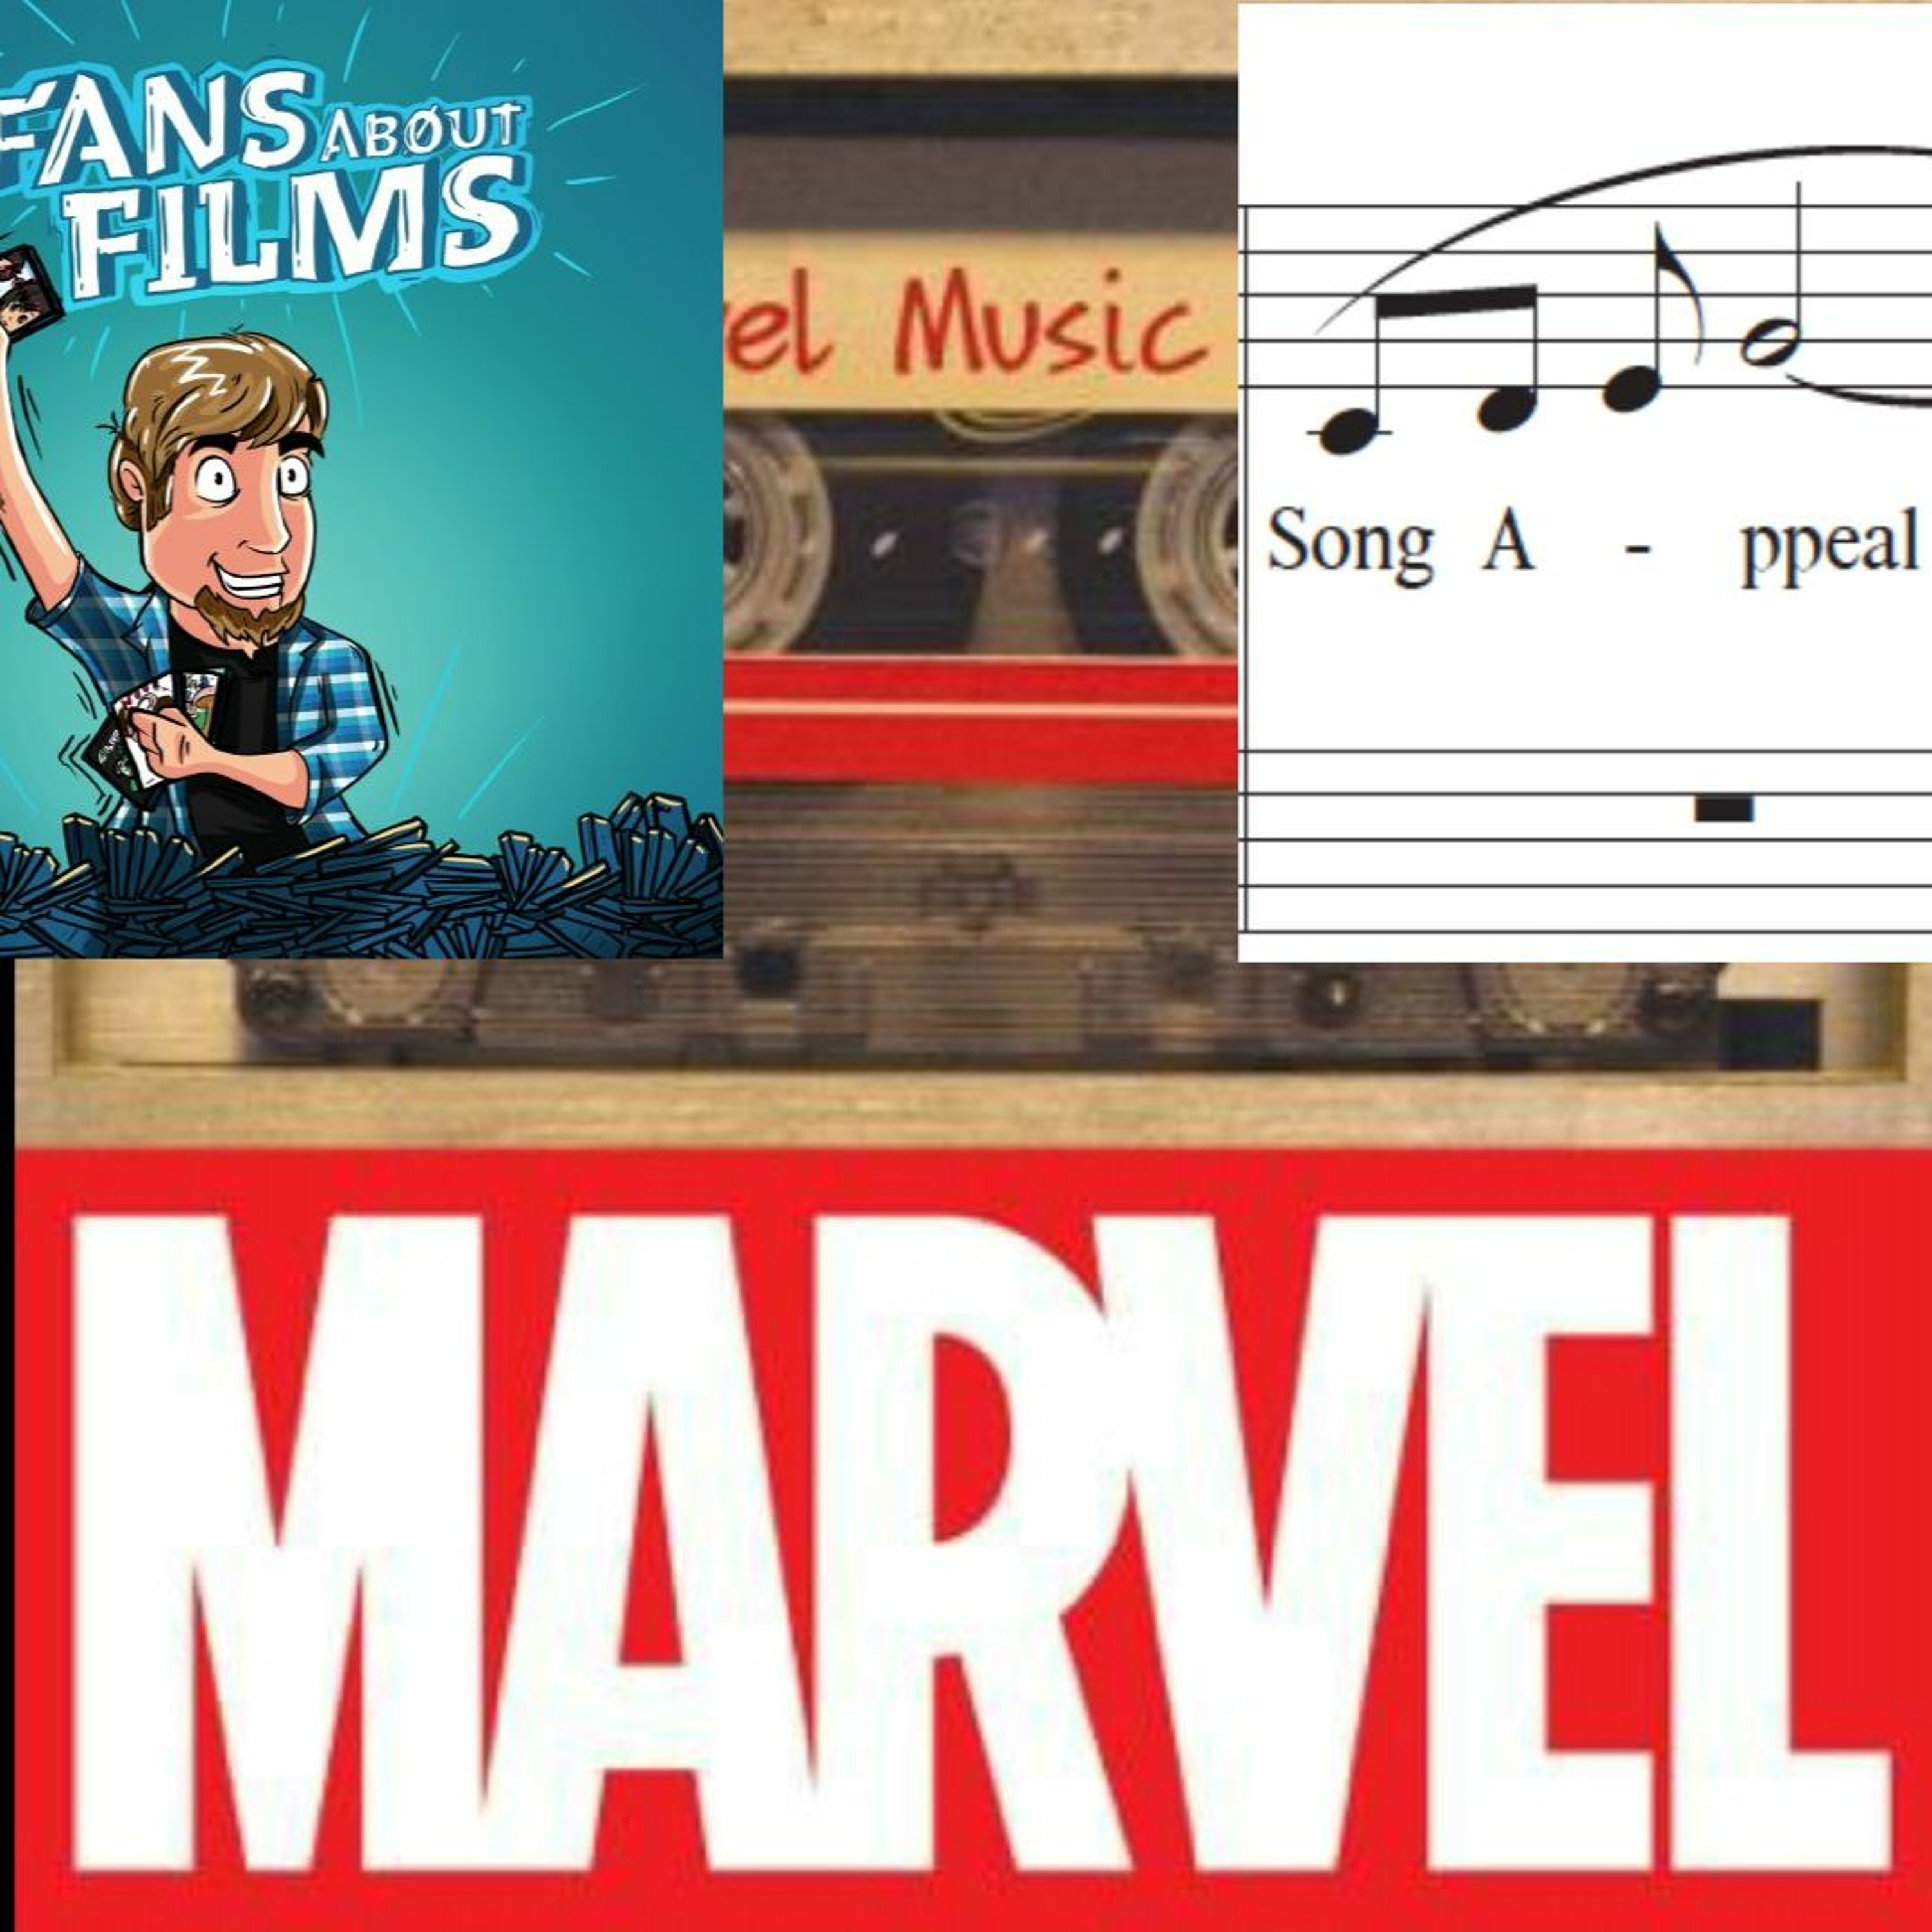 Fans About Films 19: The Marvel-”Theme” (with Hunter Farris)(English)